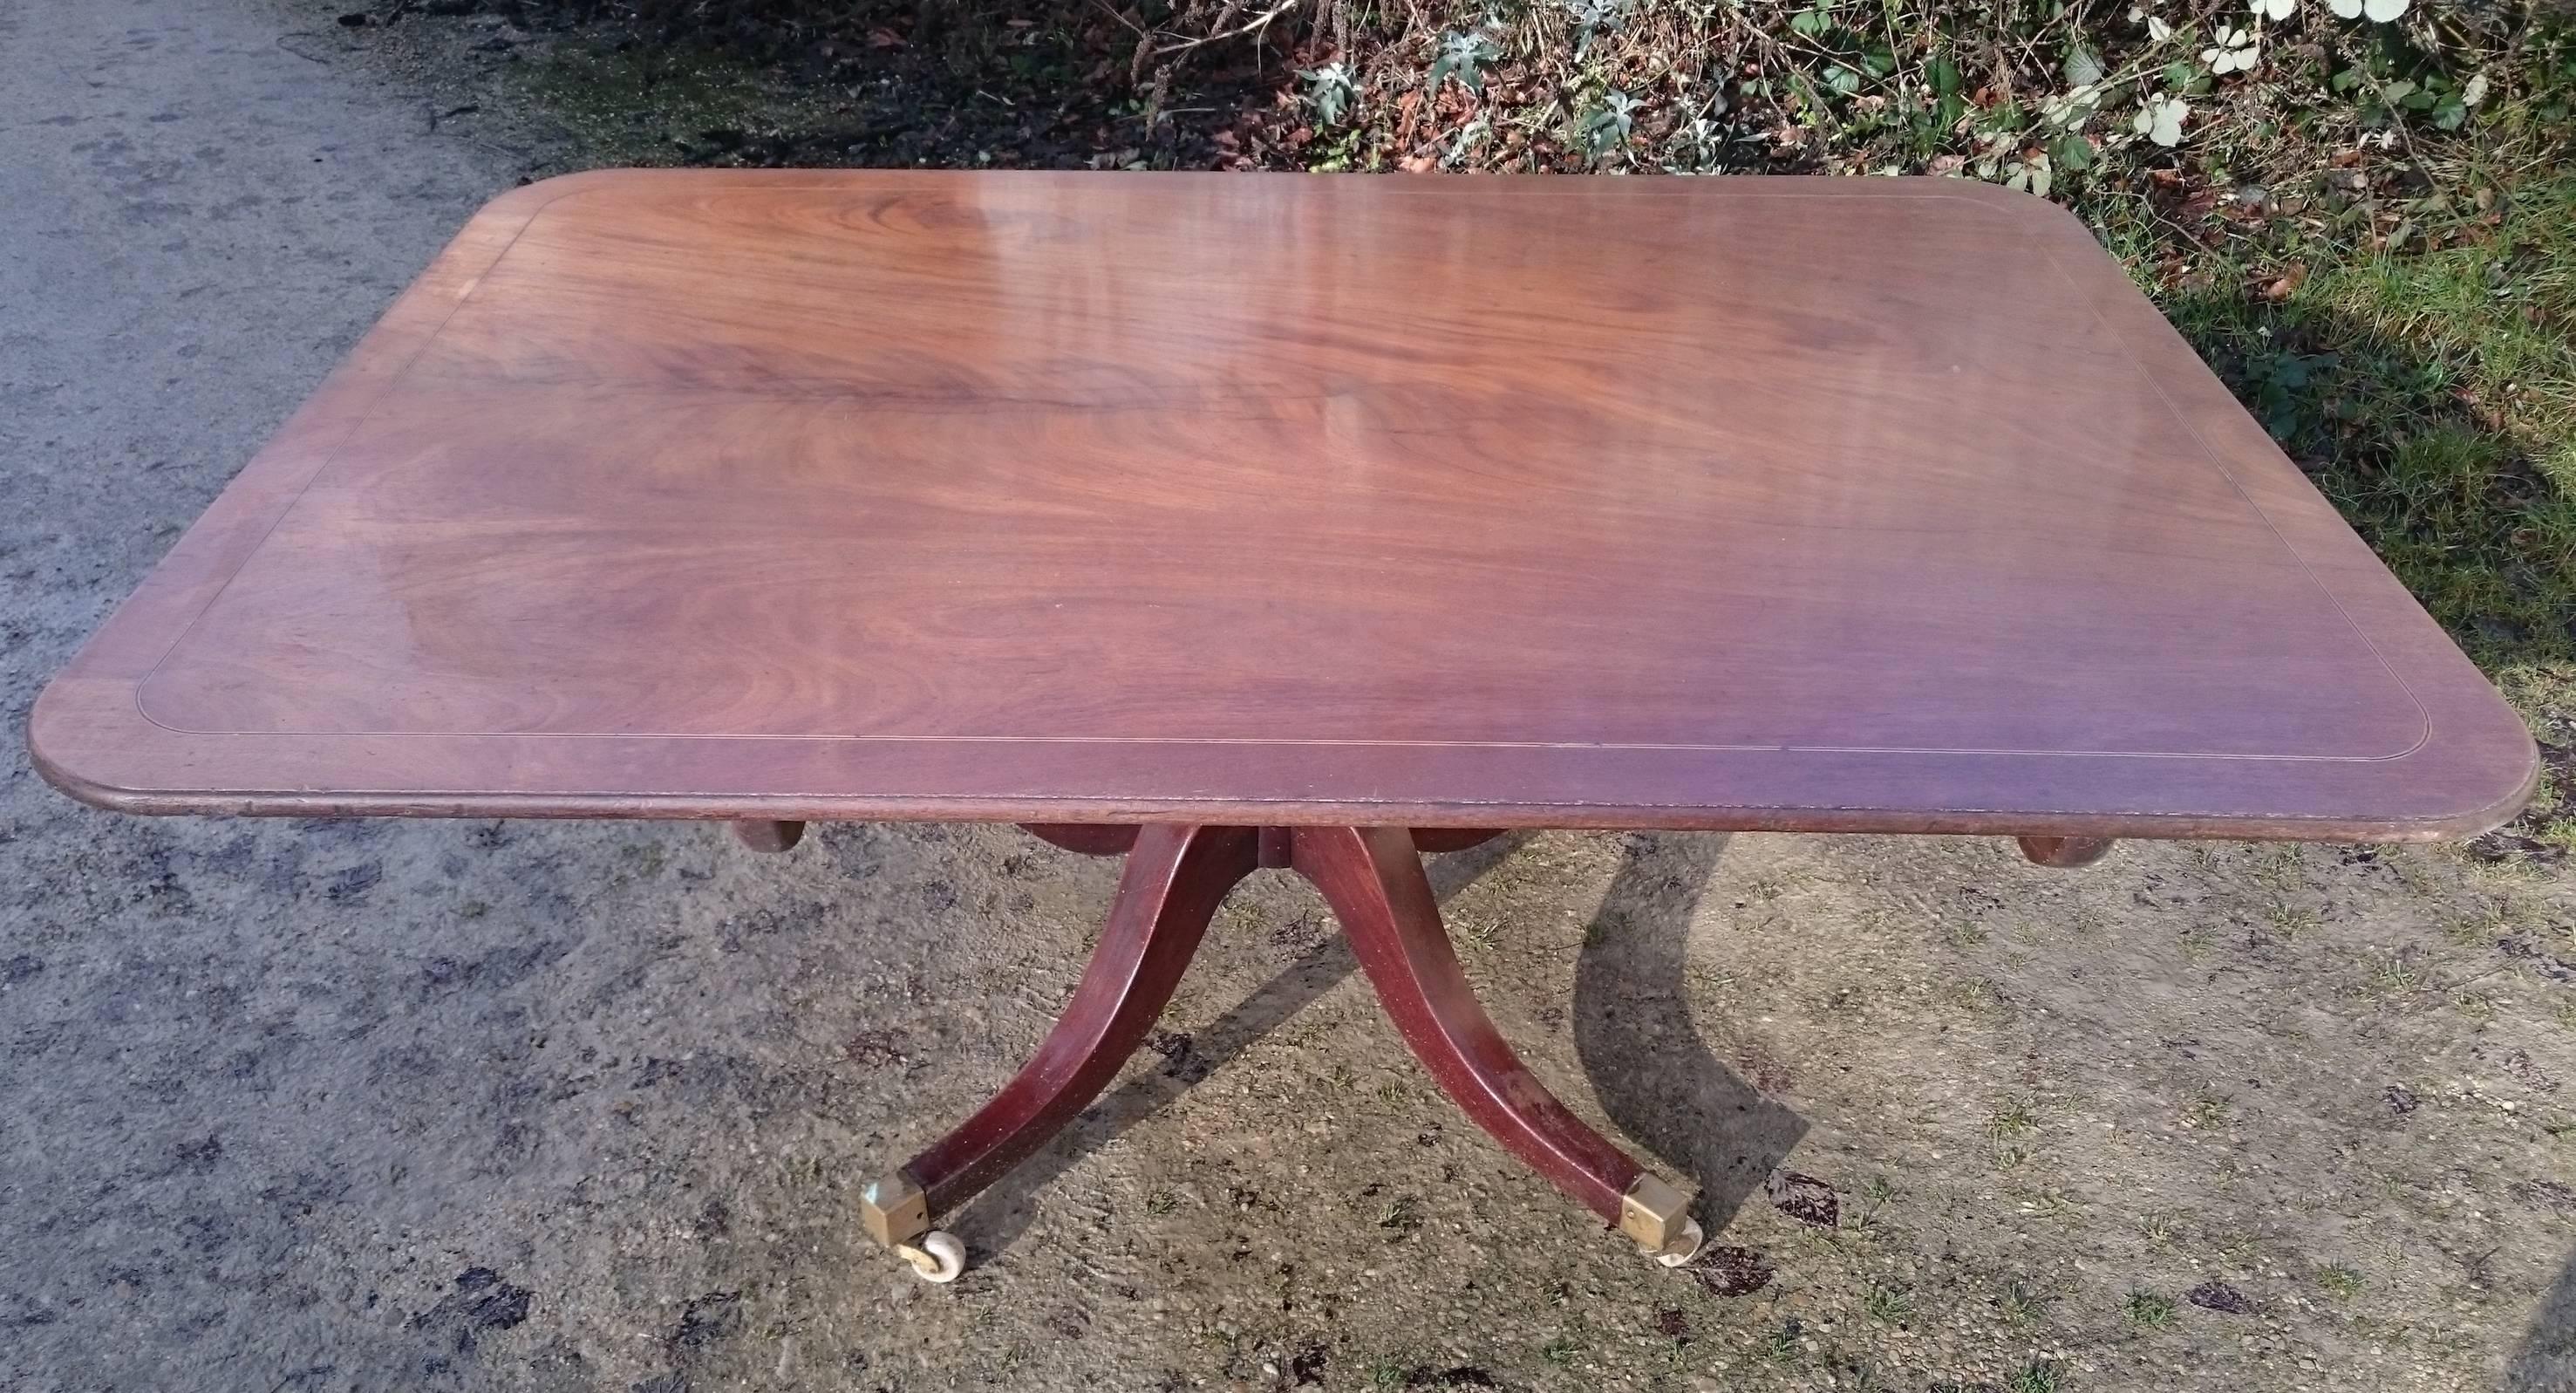 18th century George III period mahogany antique breakfast table. This table is very elegant having a slender turned column support, it stands on four outswept legs and has stringing around the edge of the top. There is no frieze so there is a lot of